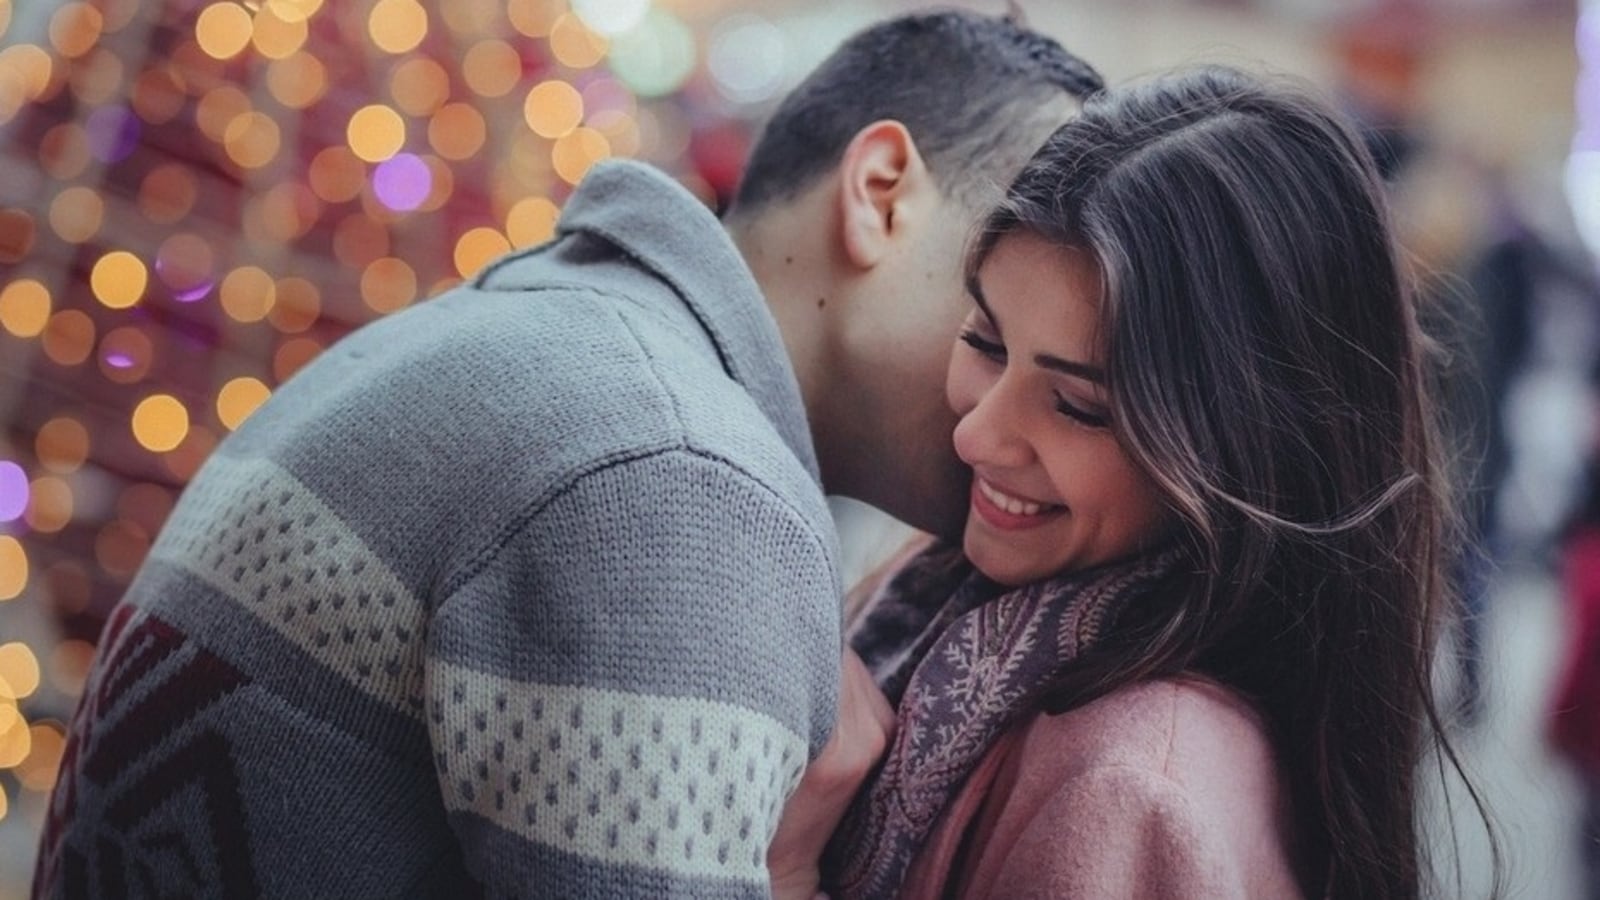 Relationship tips: How being mindful in love can strengthen your bond; expert tips